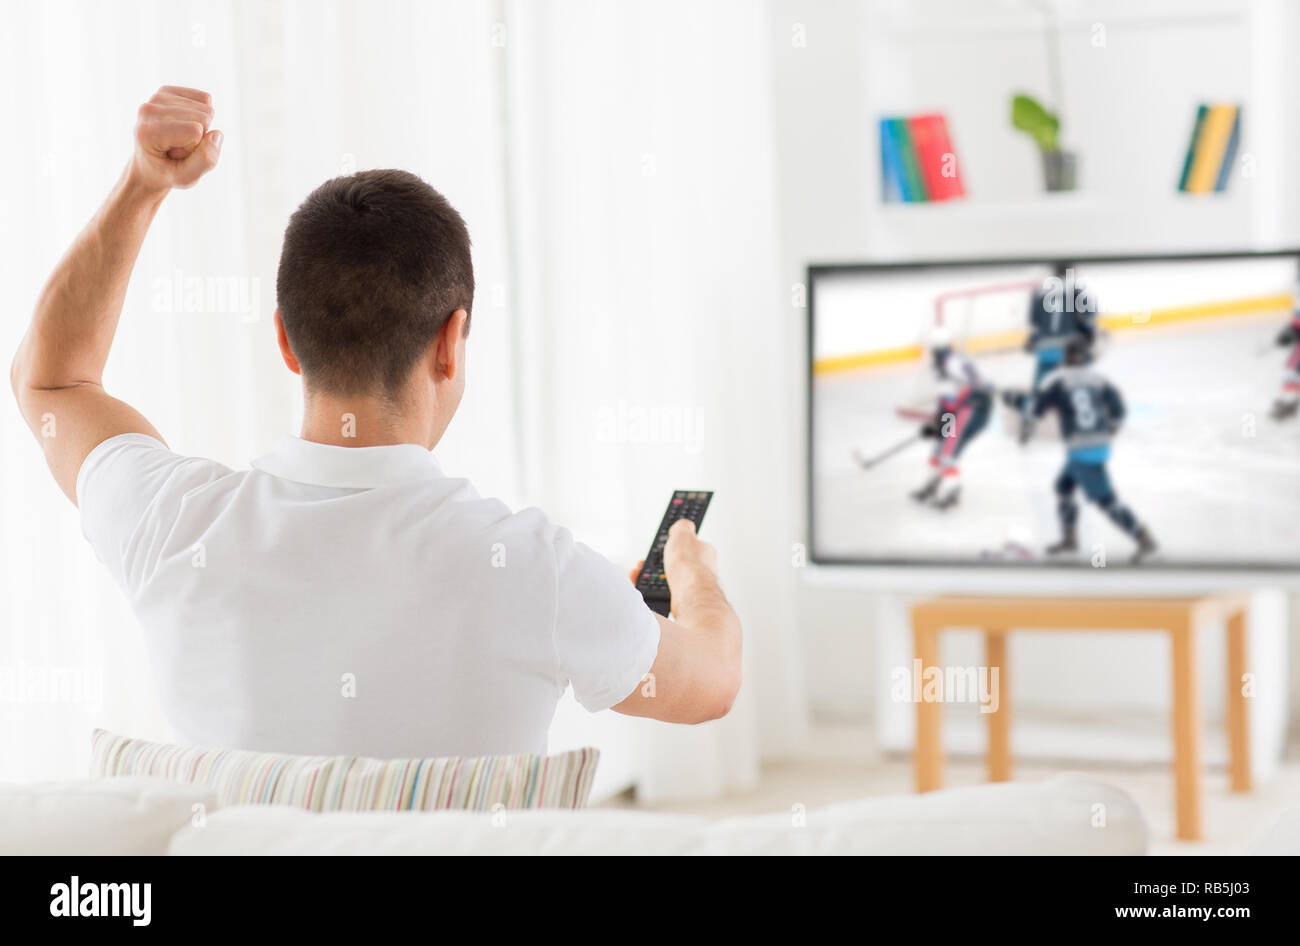 man watching ice hockey game on tv at home Stock Photo